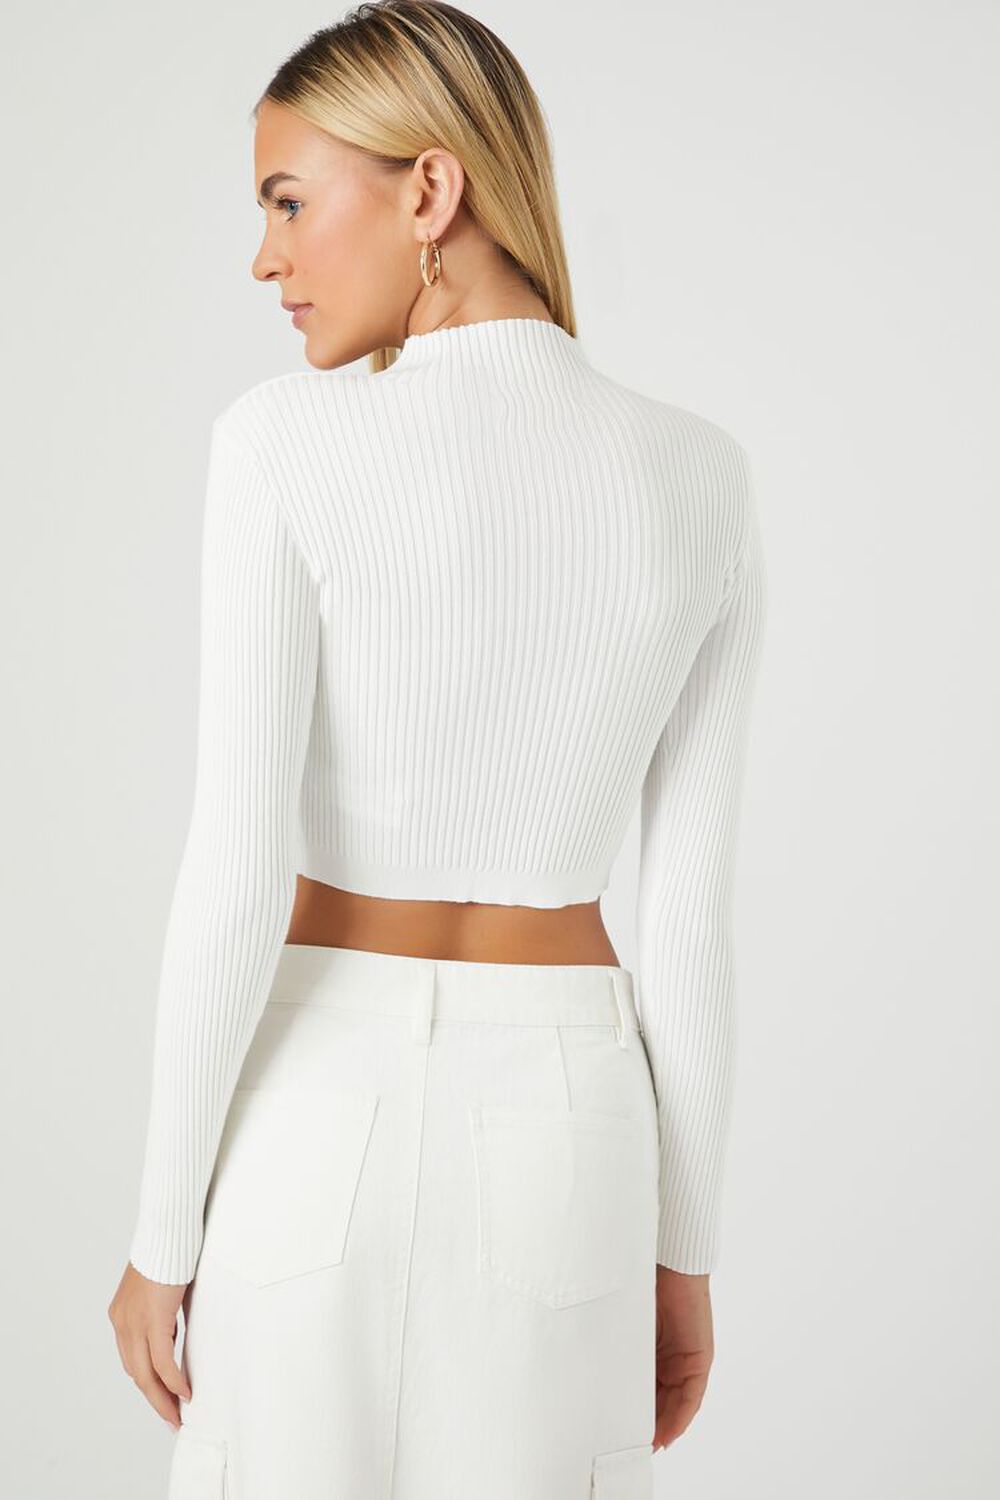 WHITE Ribbed Mock Neck Sweater-Knit Crop Top, image 3